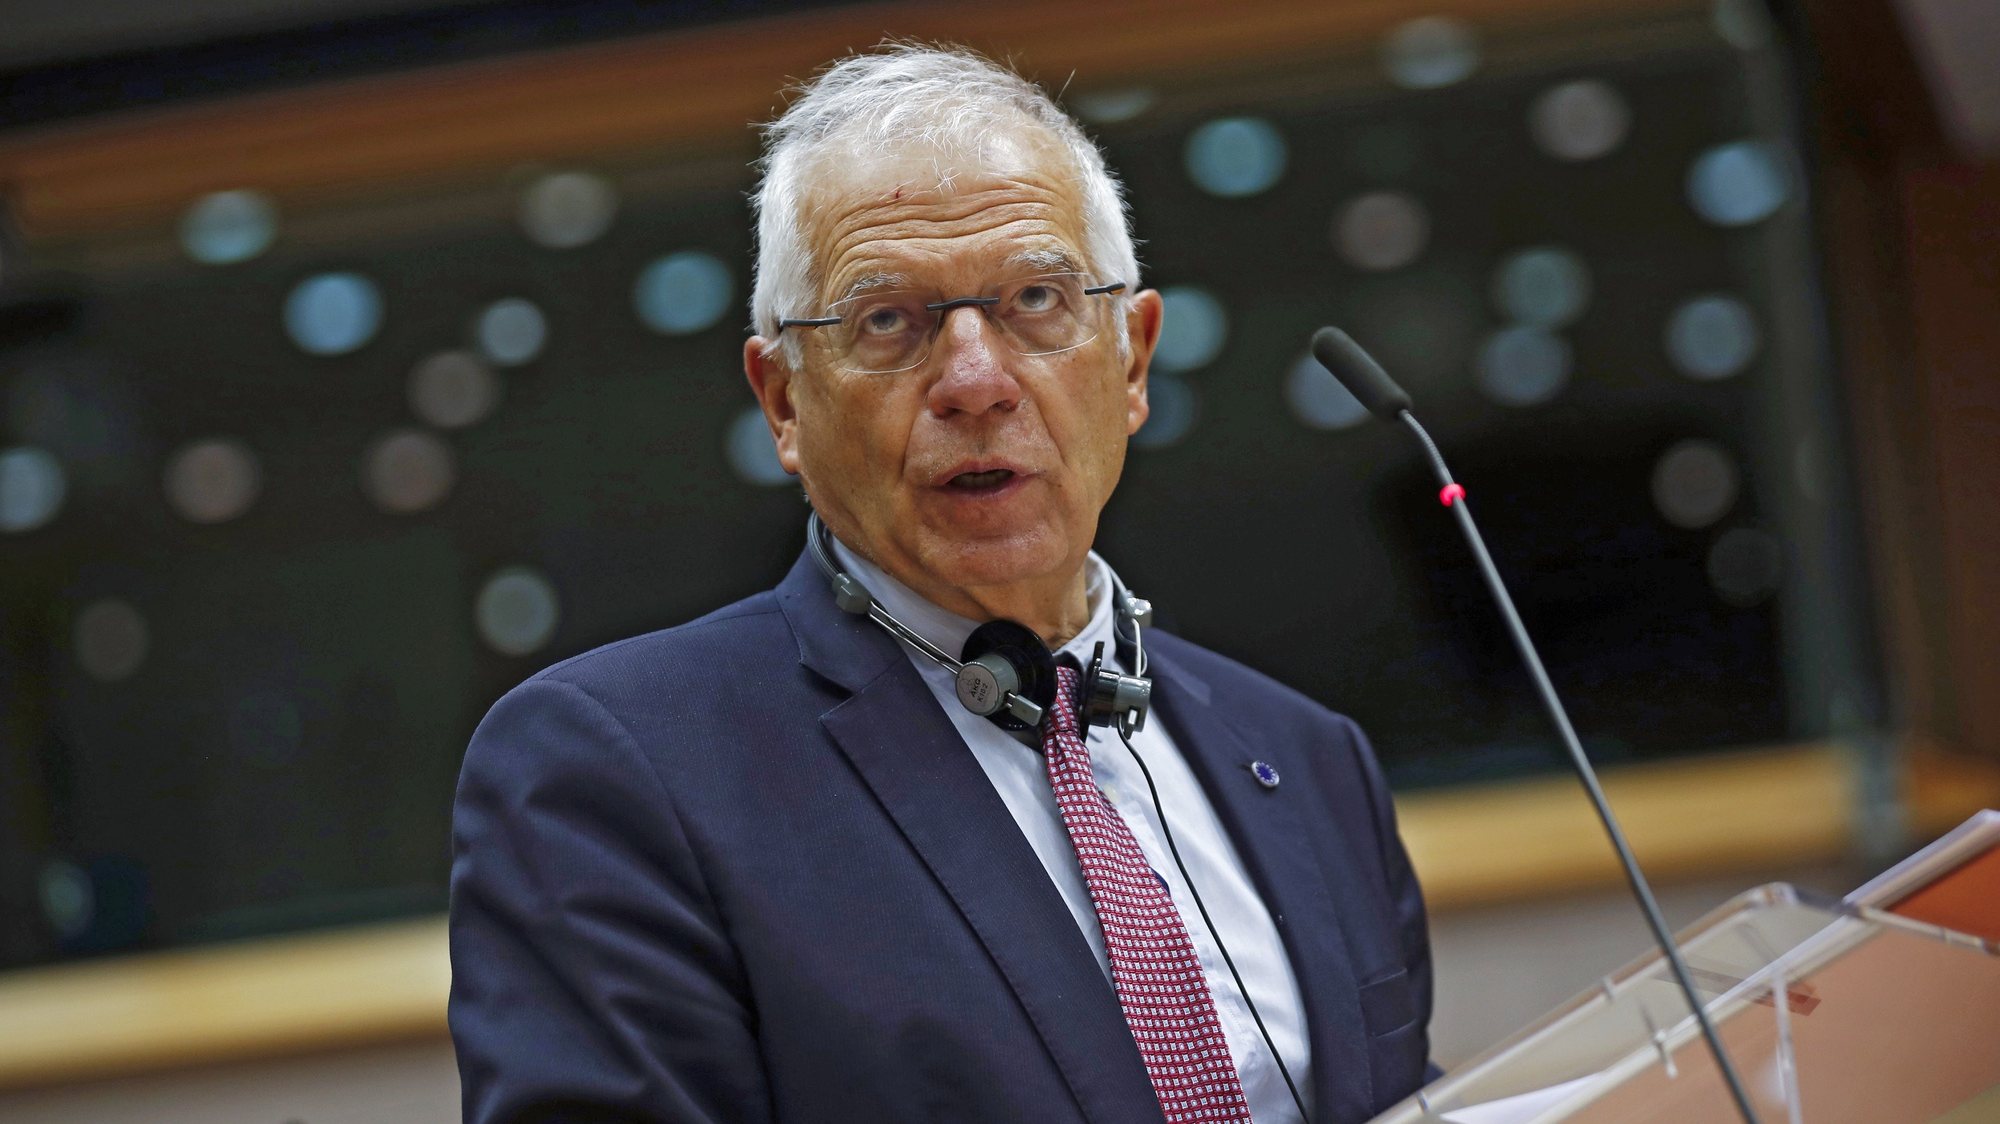 epa08759384 European Union foreign policy chief Josep Borrell addresses lawmakers during a plenary session of relations with Belarus at the European Parliament in Brussels, Belgium, 20 October 2020.  EPA/Francisco Seco / POOL